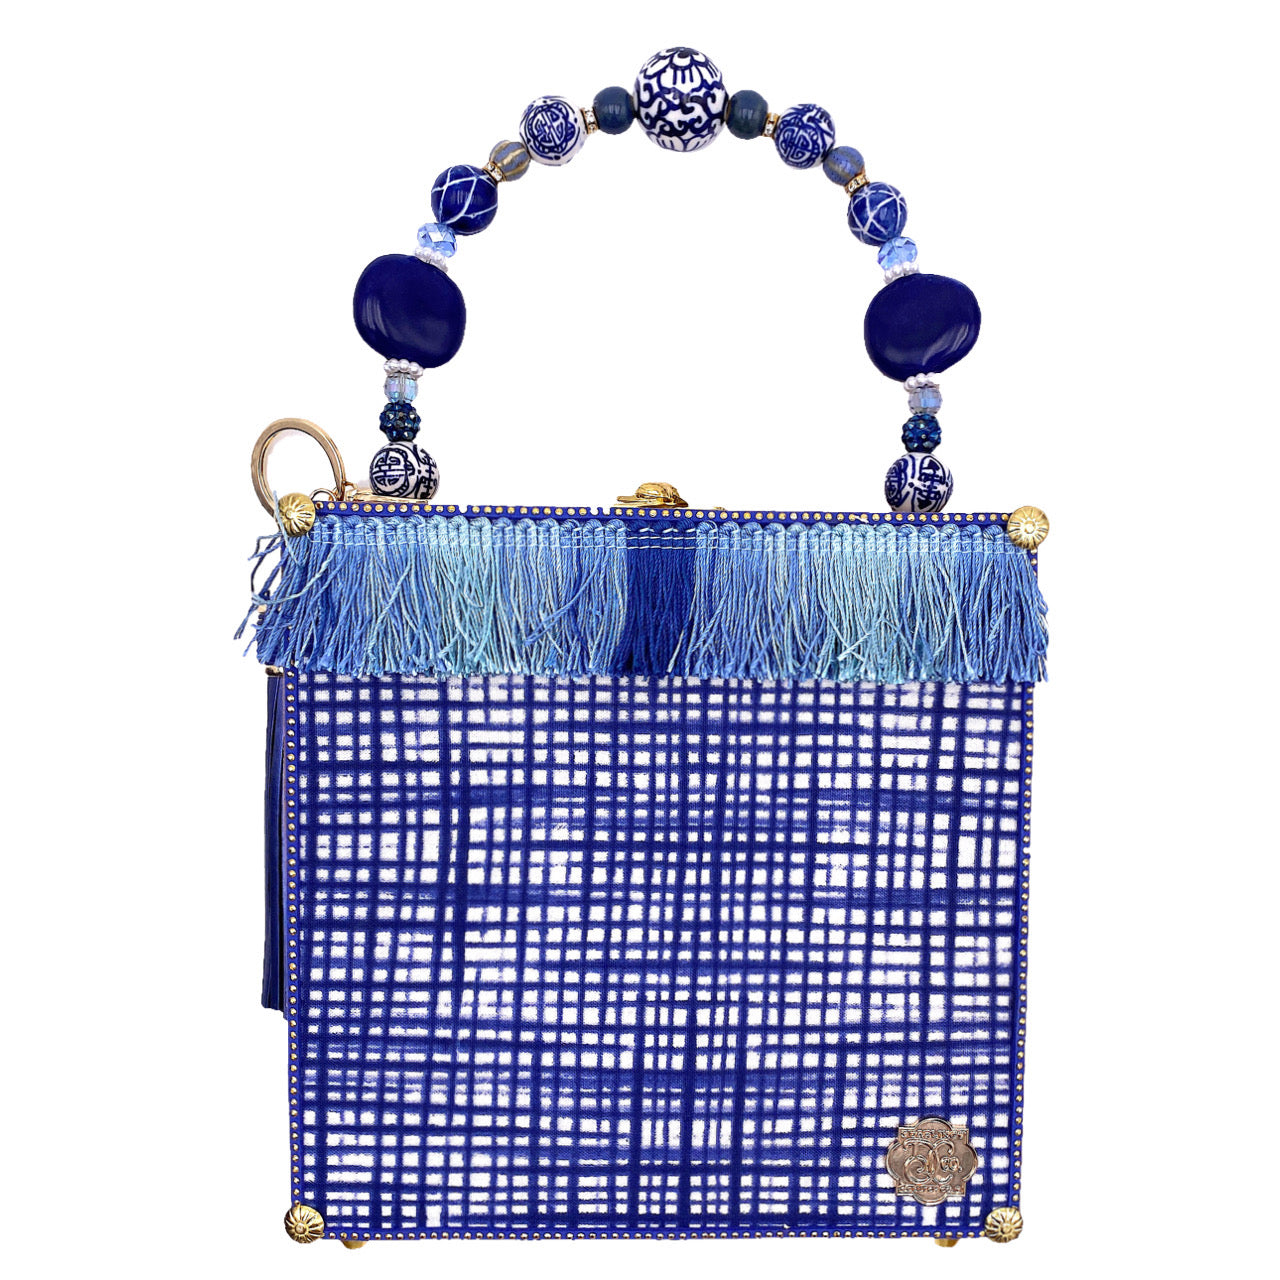 Pawley's Toile Blue Bag